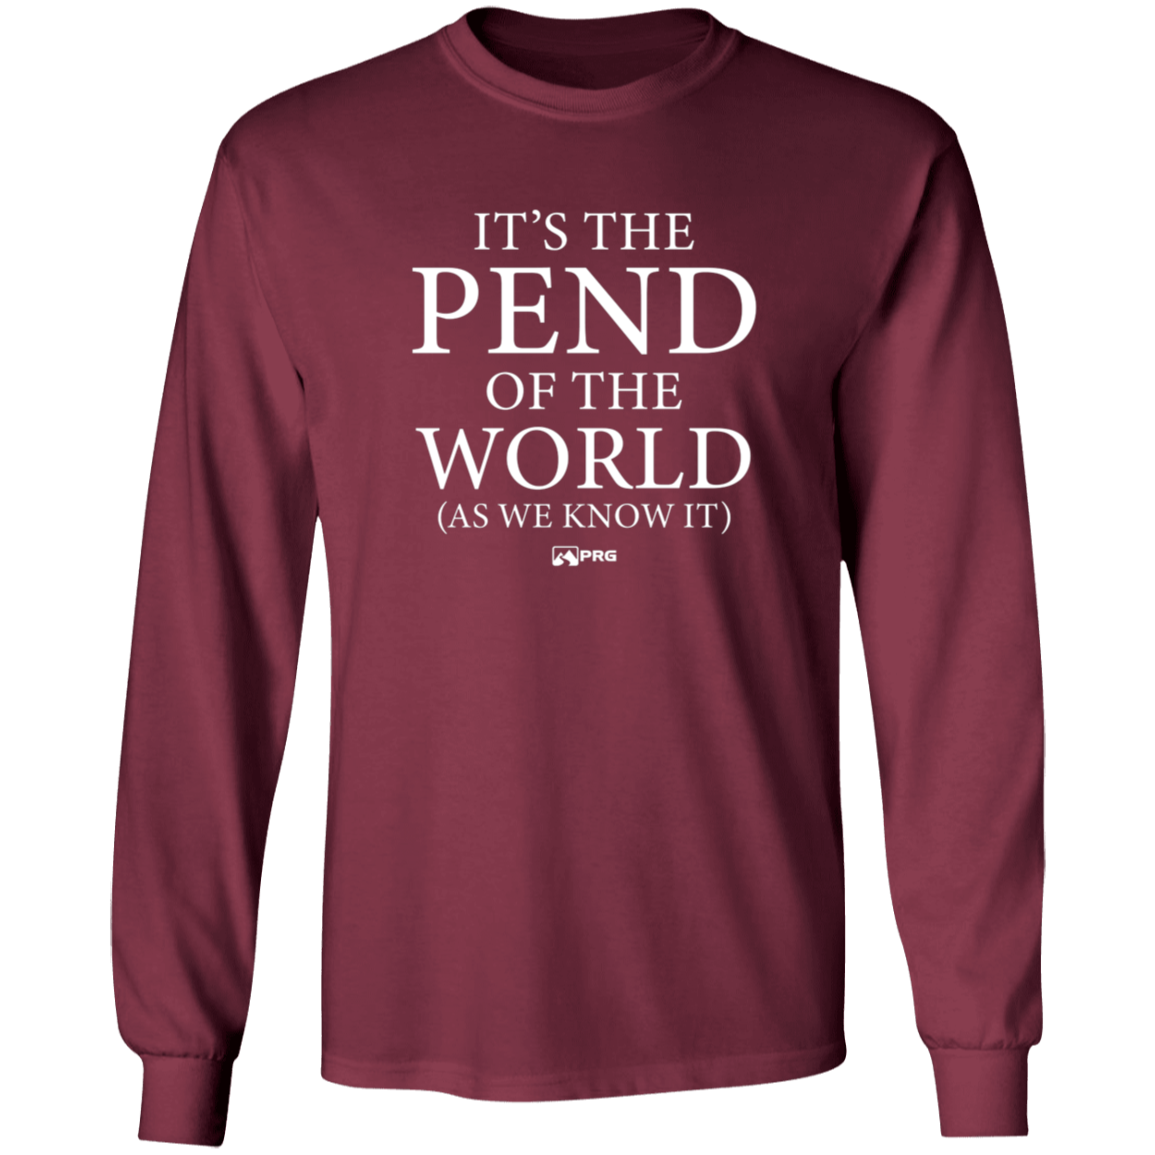 Pend of the World - Long Sleeve